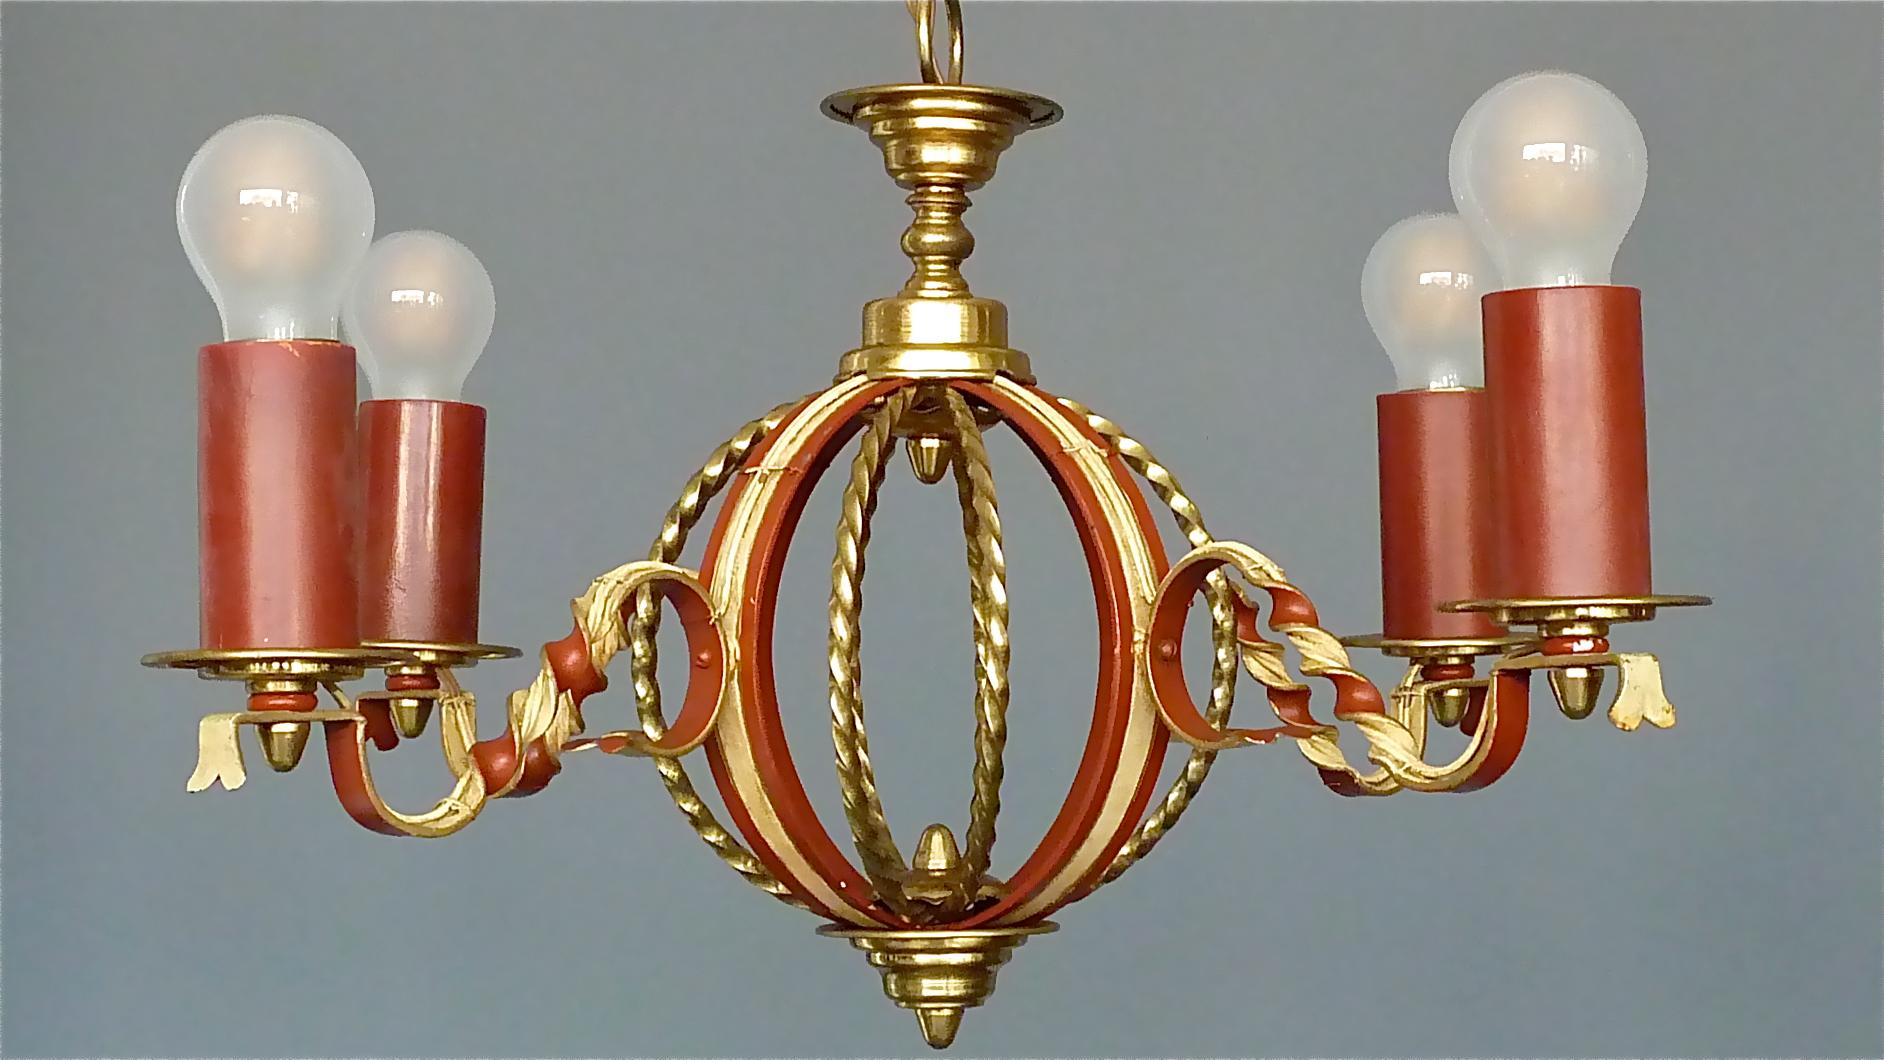 Enameled Large French Poillerat Style Globe Chandelier Wrought Iron Brass 1950s no.2 of 2 For Sale